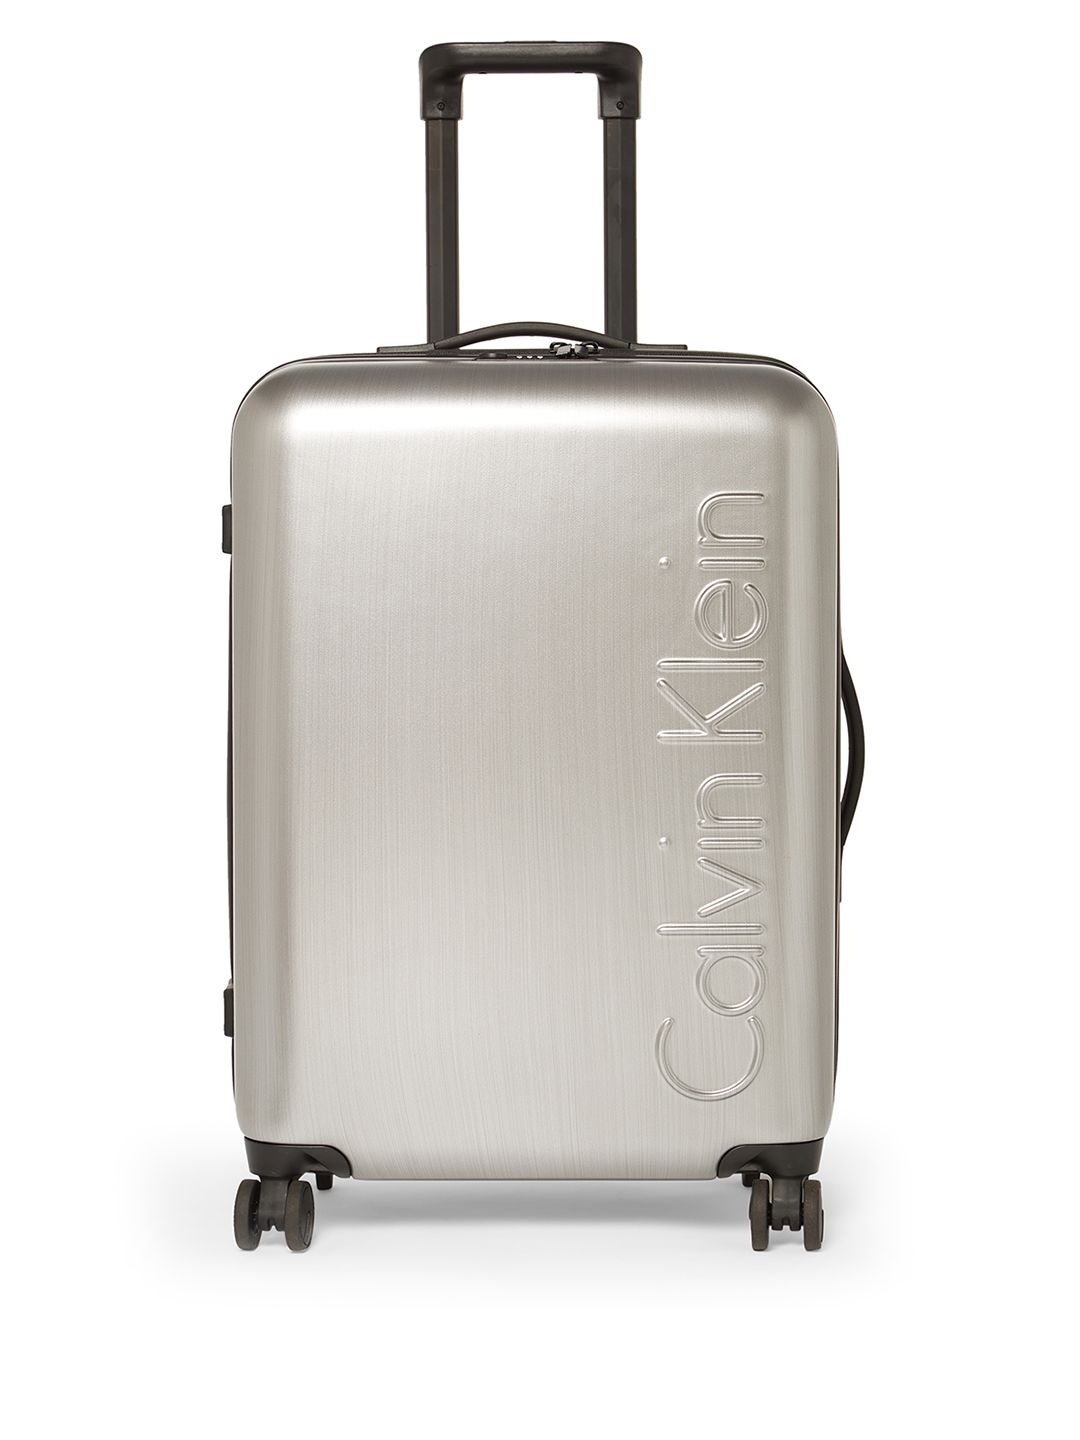 Calvin Klein SOUTH HAMPTON 3.0 Silver-Toned The Standard Hard-Sided Medium Trolley Price in India